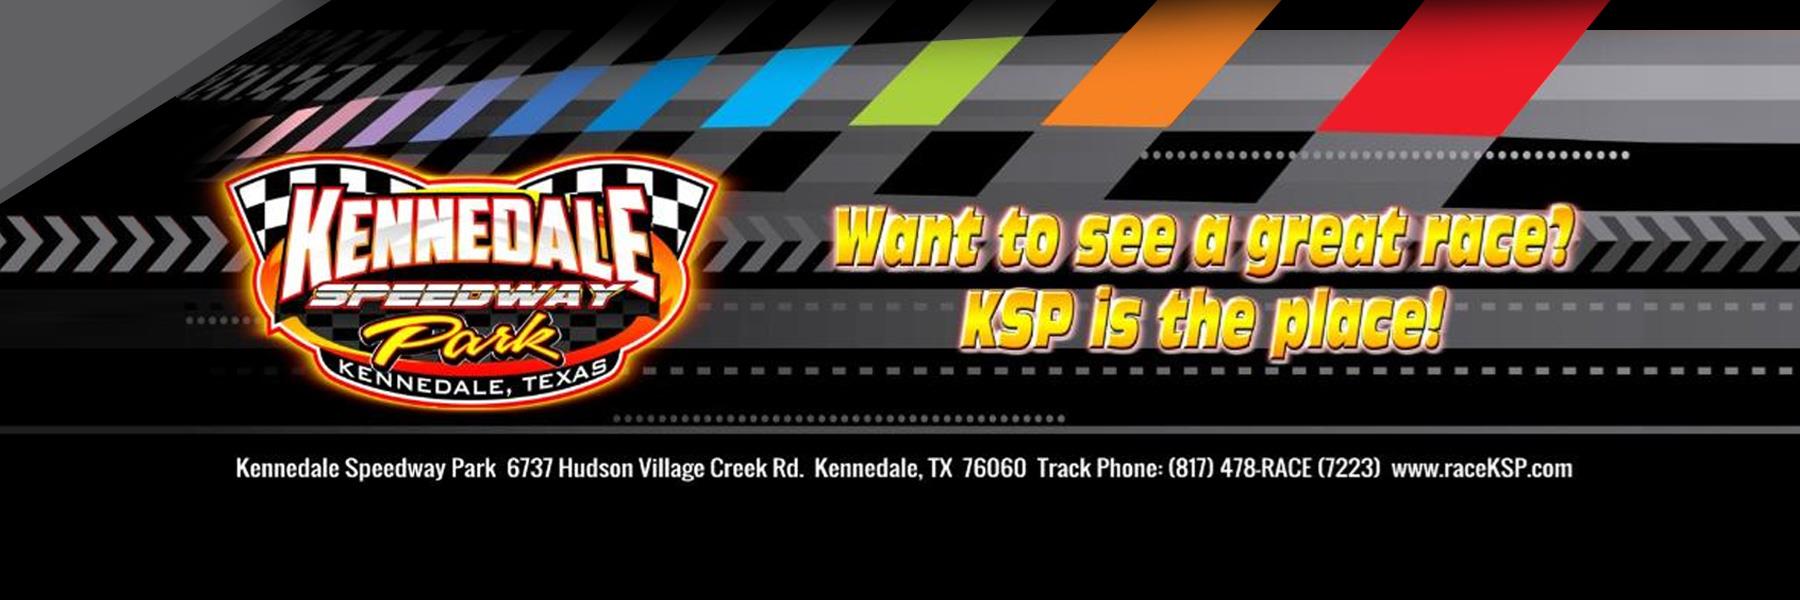 9/18/2021 - Kennedale Speedway Park